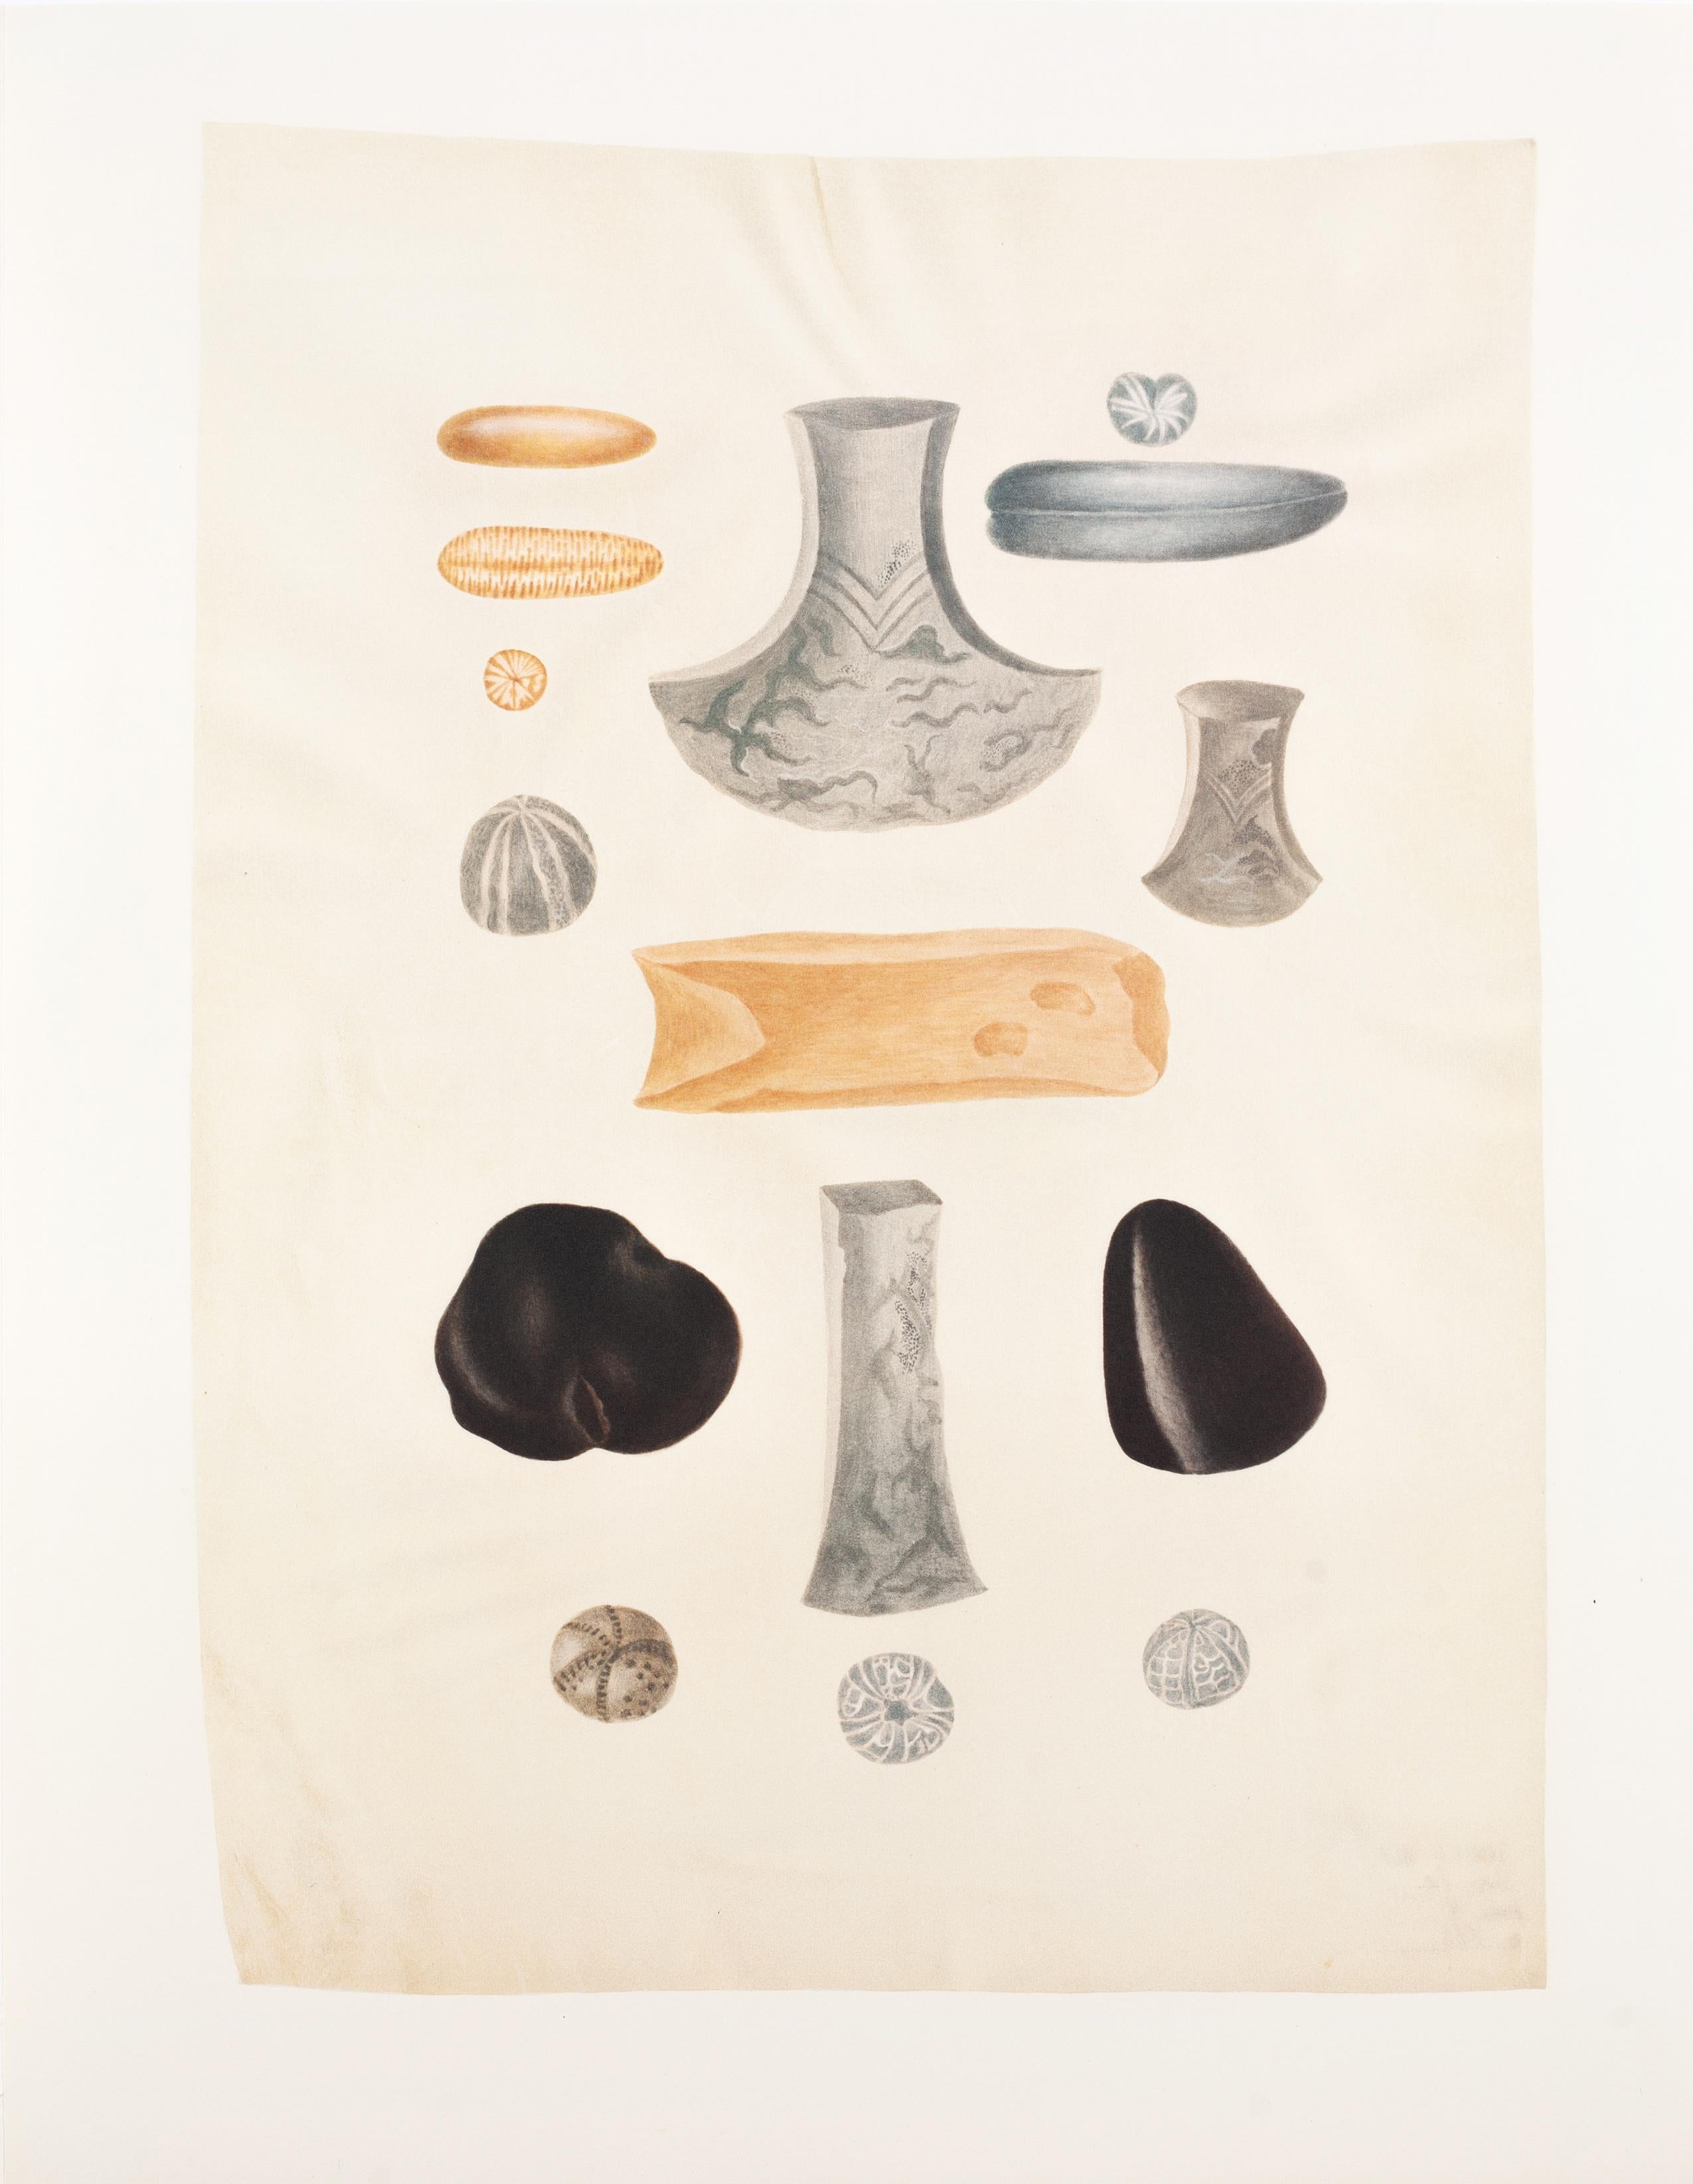 21. Fingerstones, fossil blemnites, Axes of nephrite, flint & metal, Fossilized - Print by Maria Sybilla Merian